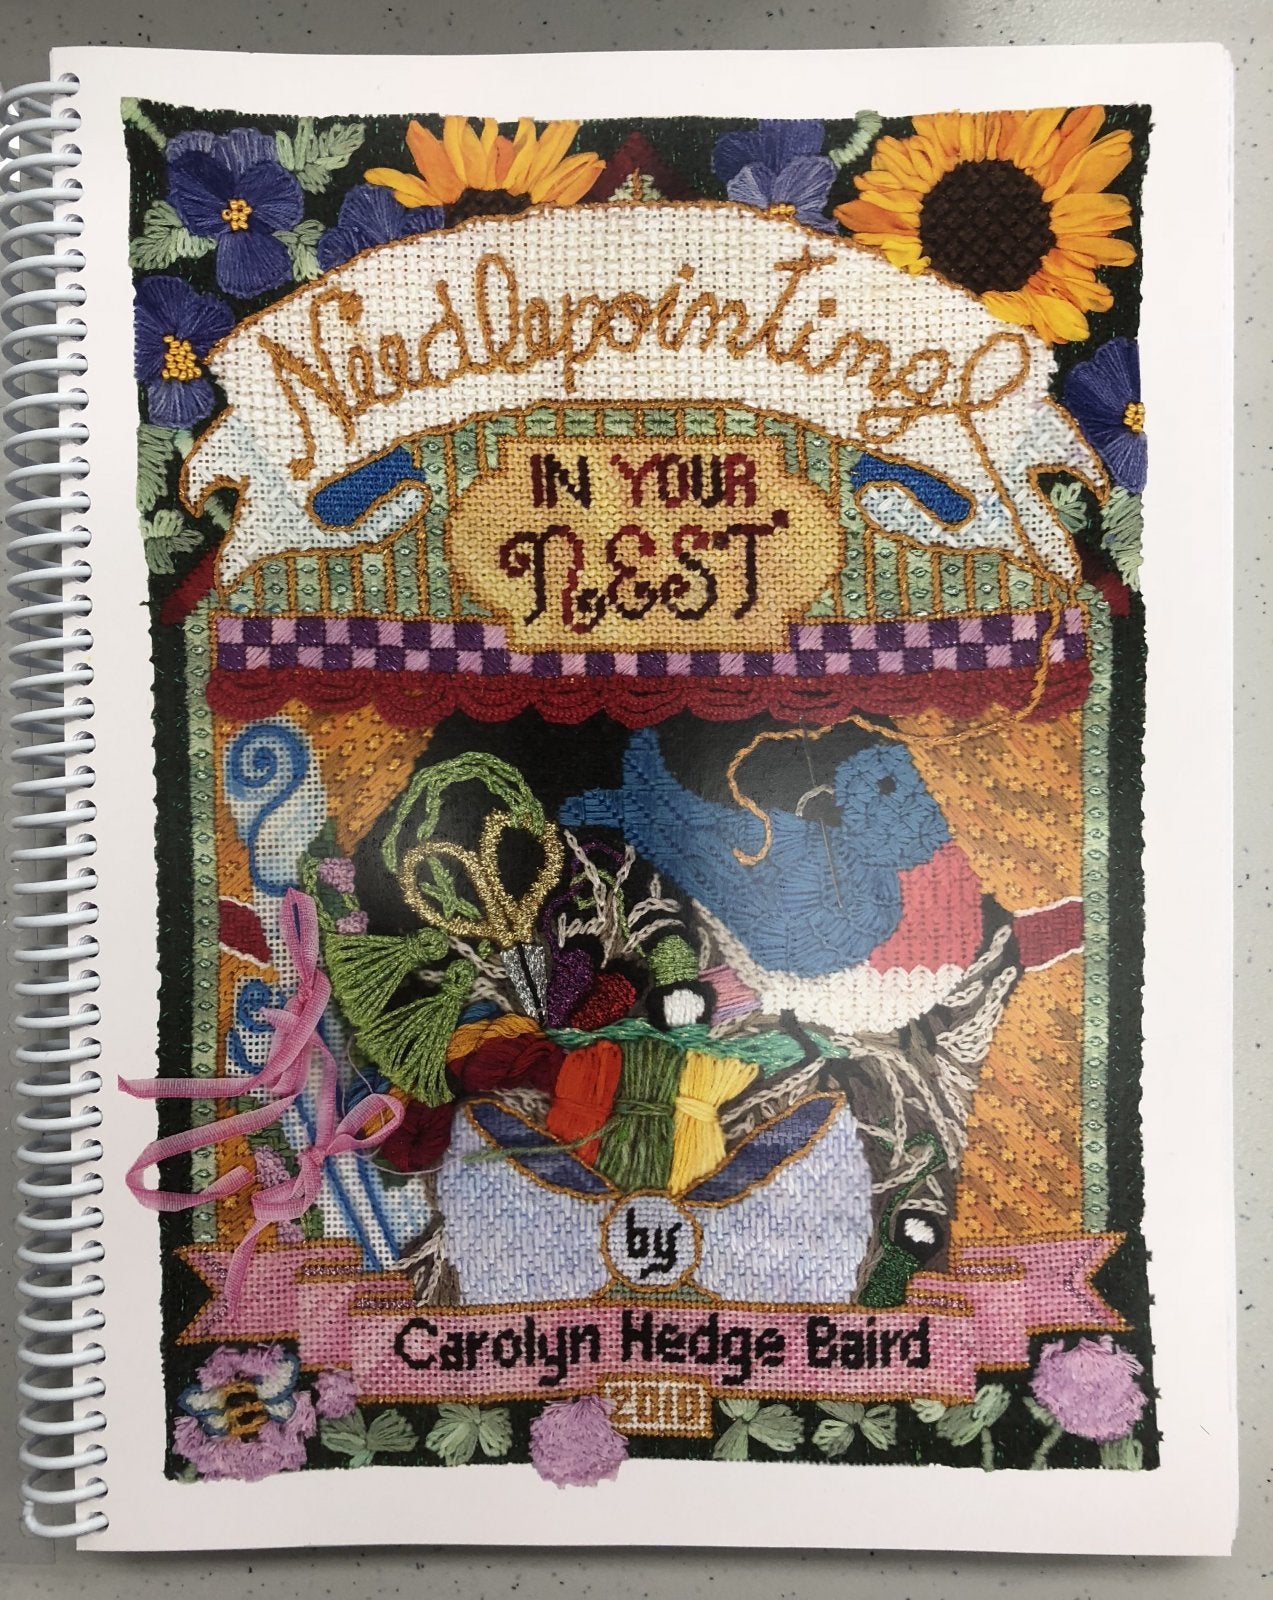 Needlepoint Stitchpirations Book by Carolyn Hedge Baird